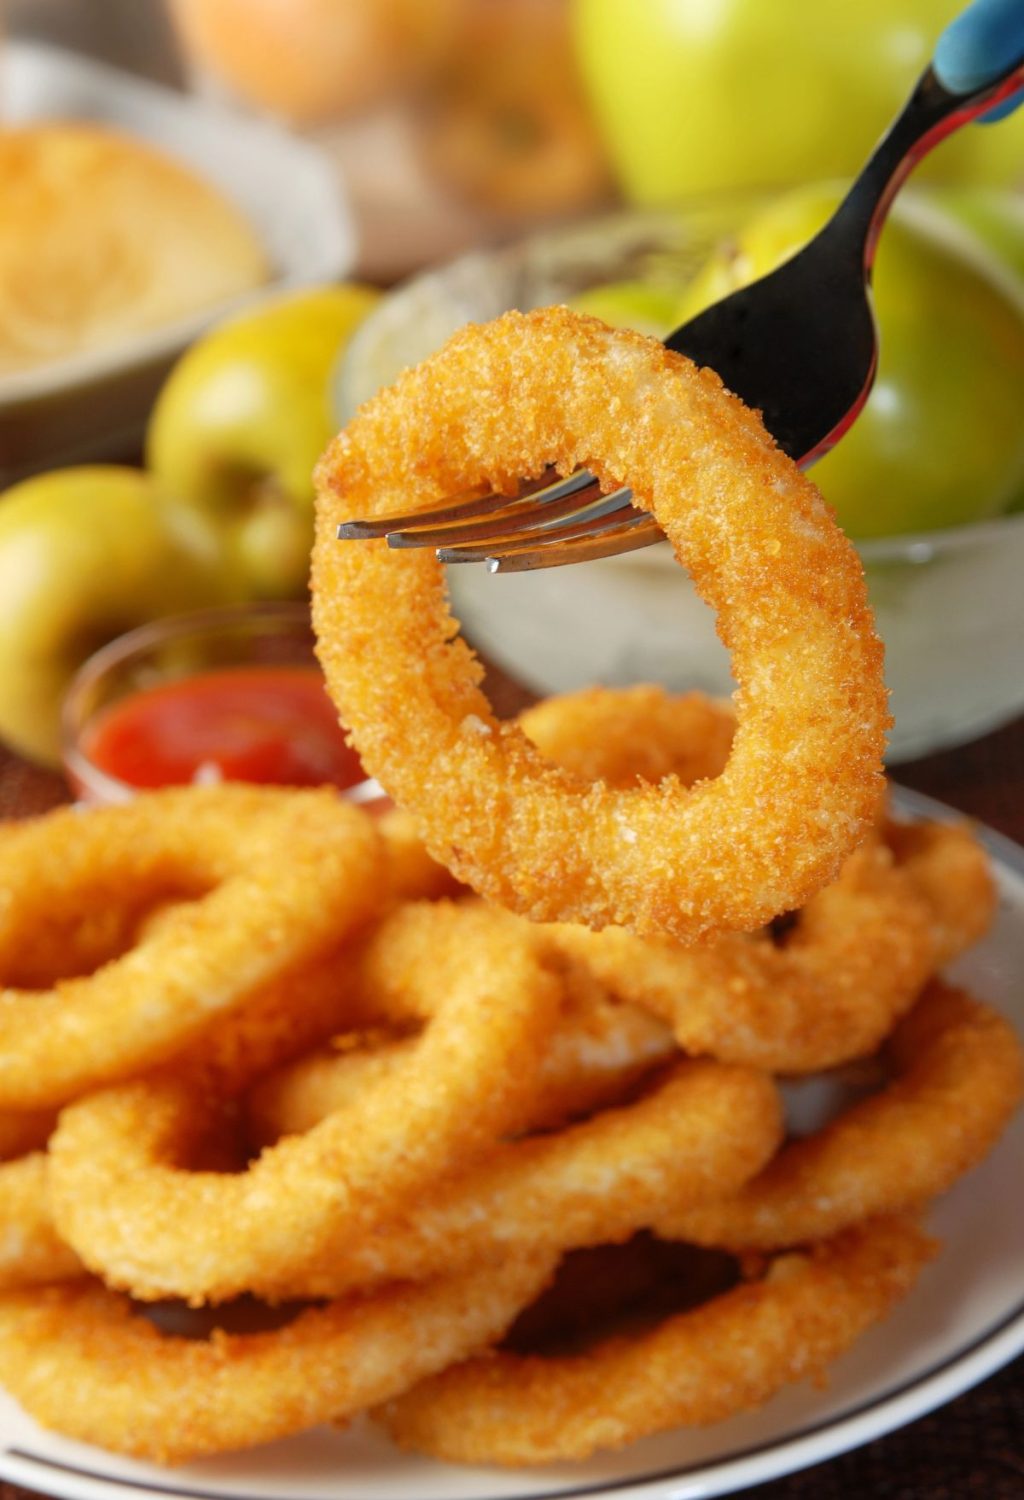 Fried onion rings on a plate.